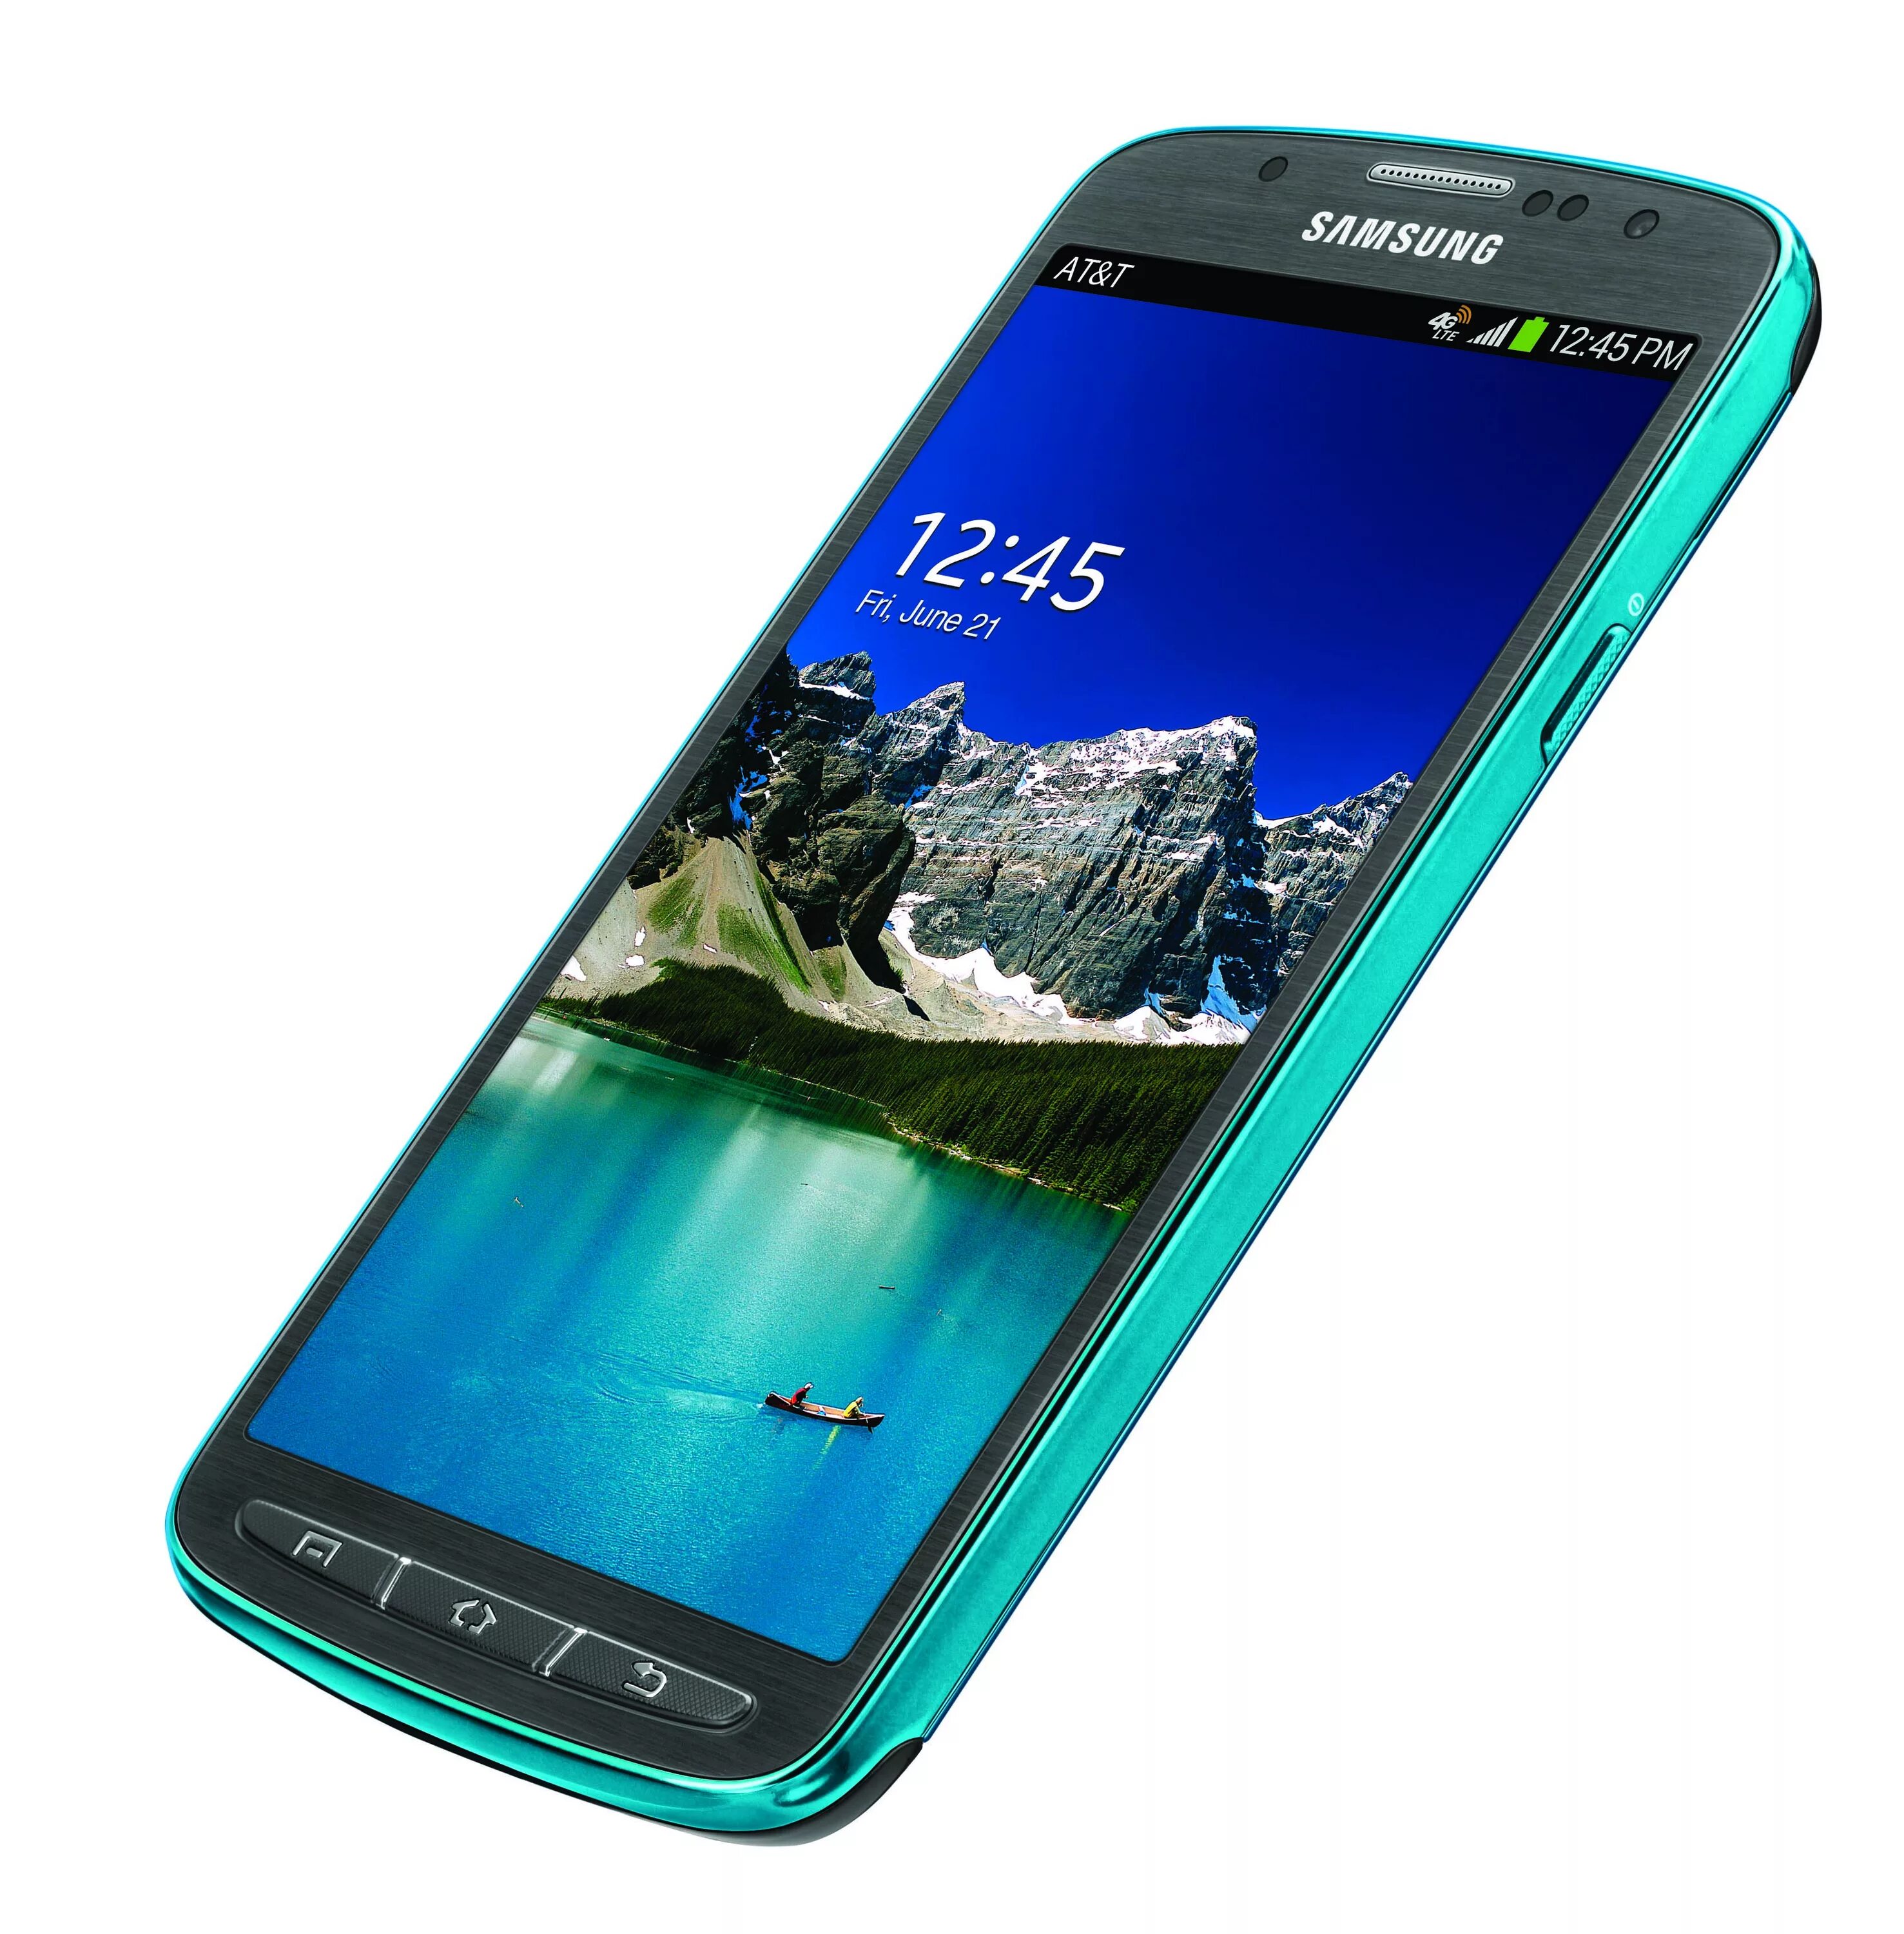 Samsung Galaxy s4 Active. Samsung s21 Active. Самсунг галакси с 21. Android Samsung Galaxy s 21. Купить галакси с пробегом